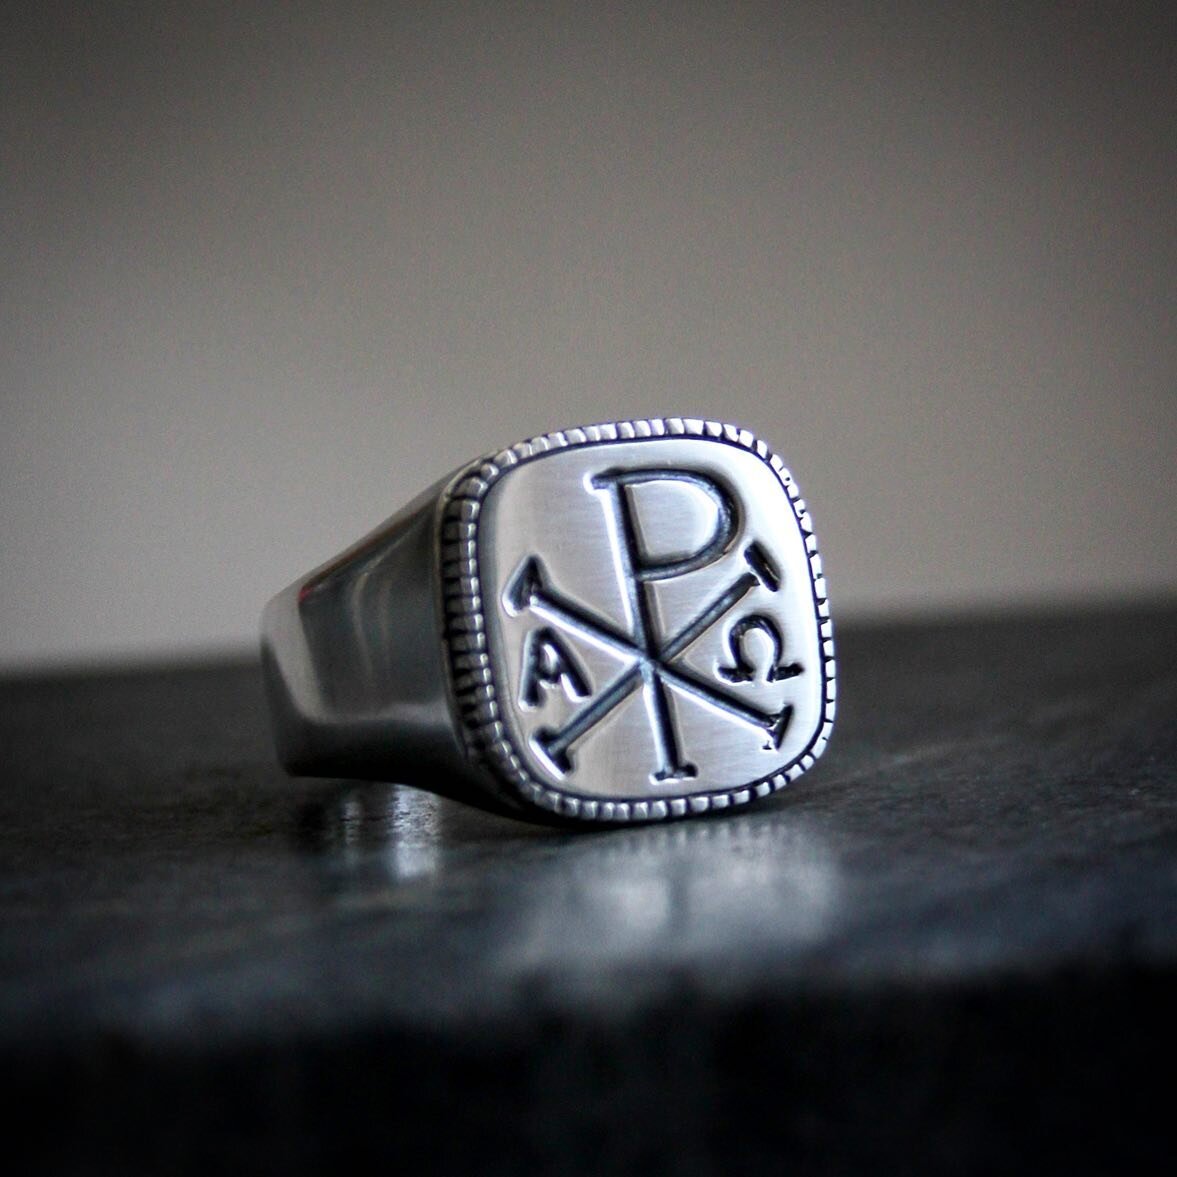 This ring just met it&rsquo;s owner, @postdocdad. Merry Be-lated Christmas! The signet ring as a shape and symbol has been a long favourite of mine. Hand carved in wax and cast in sterling silver. The P with X is the symbol for Christ with accompanyi